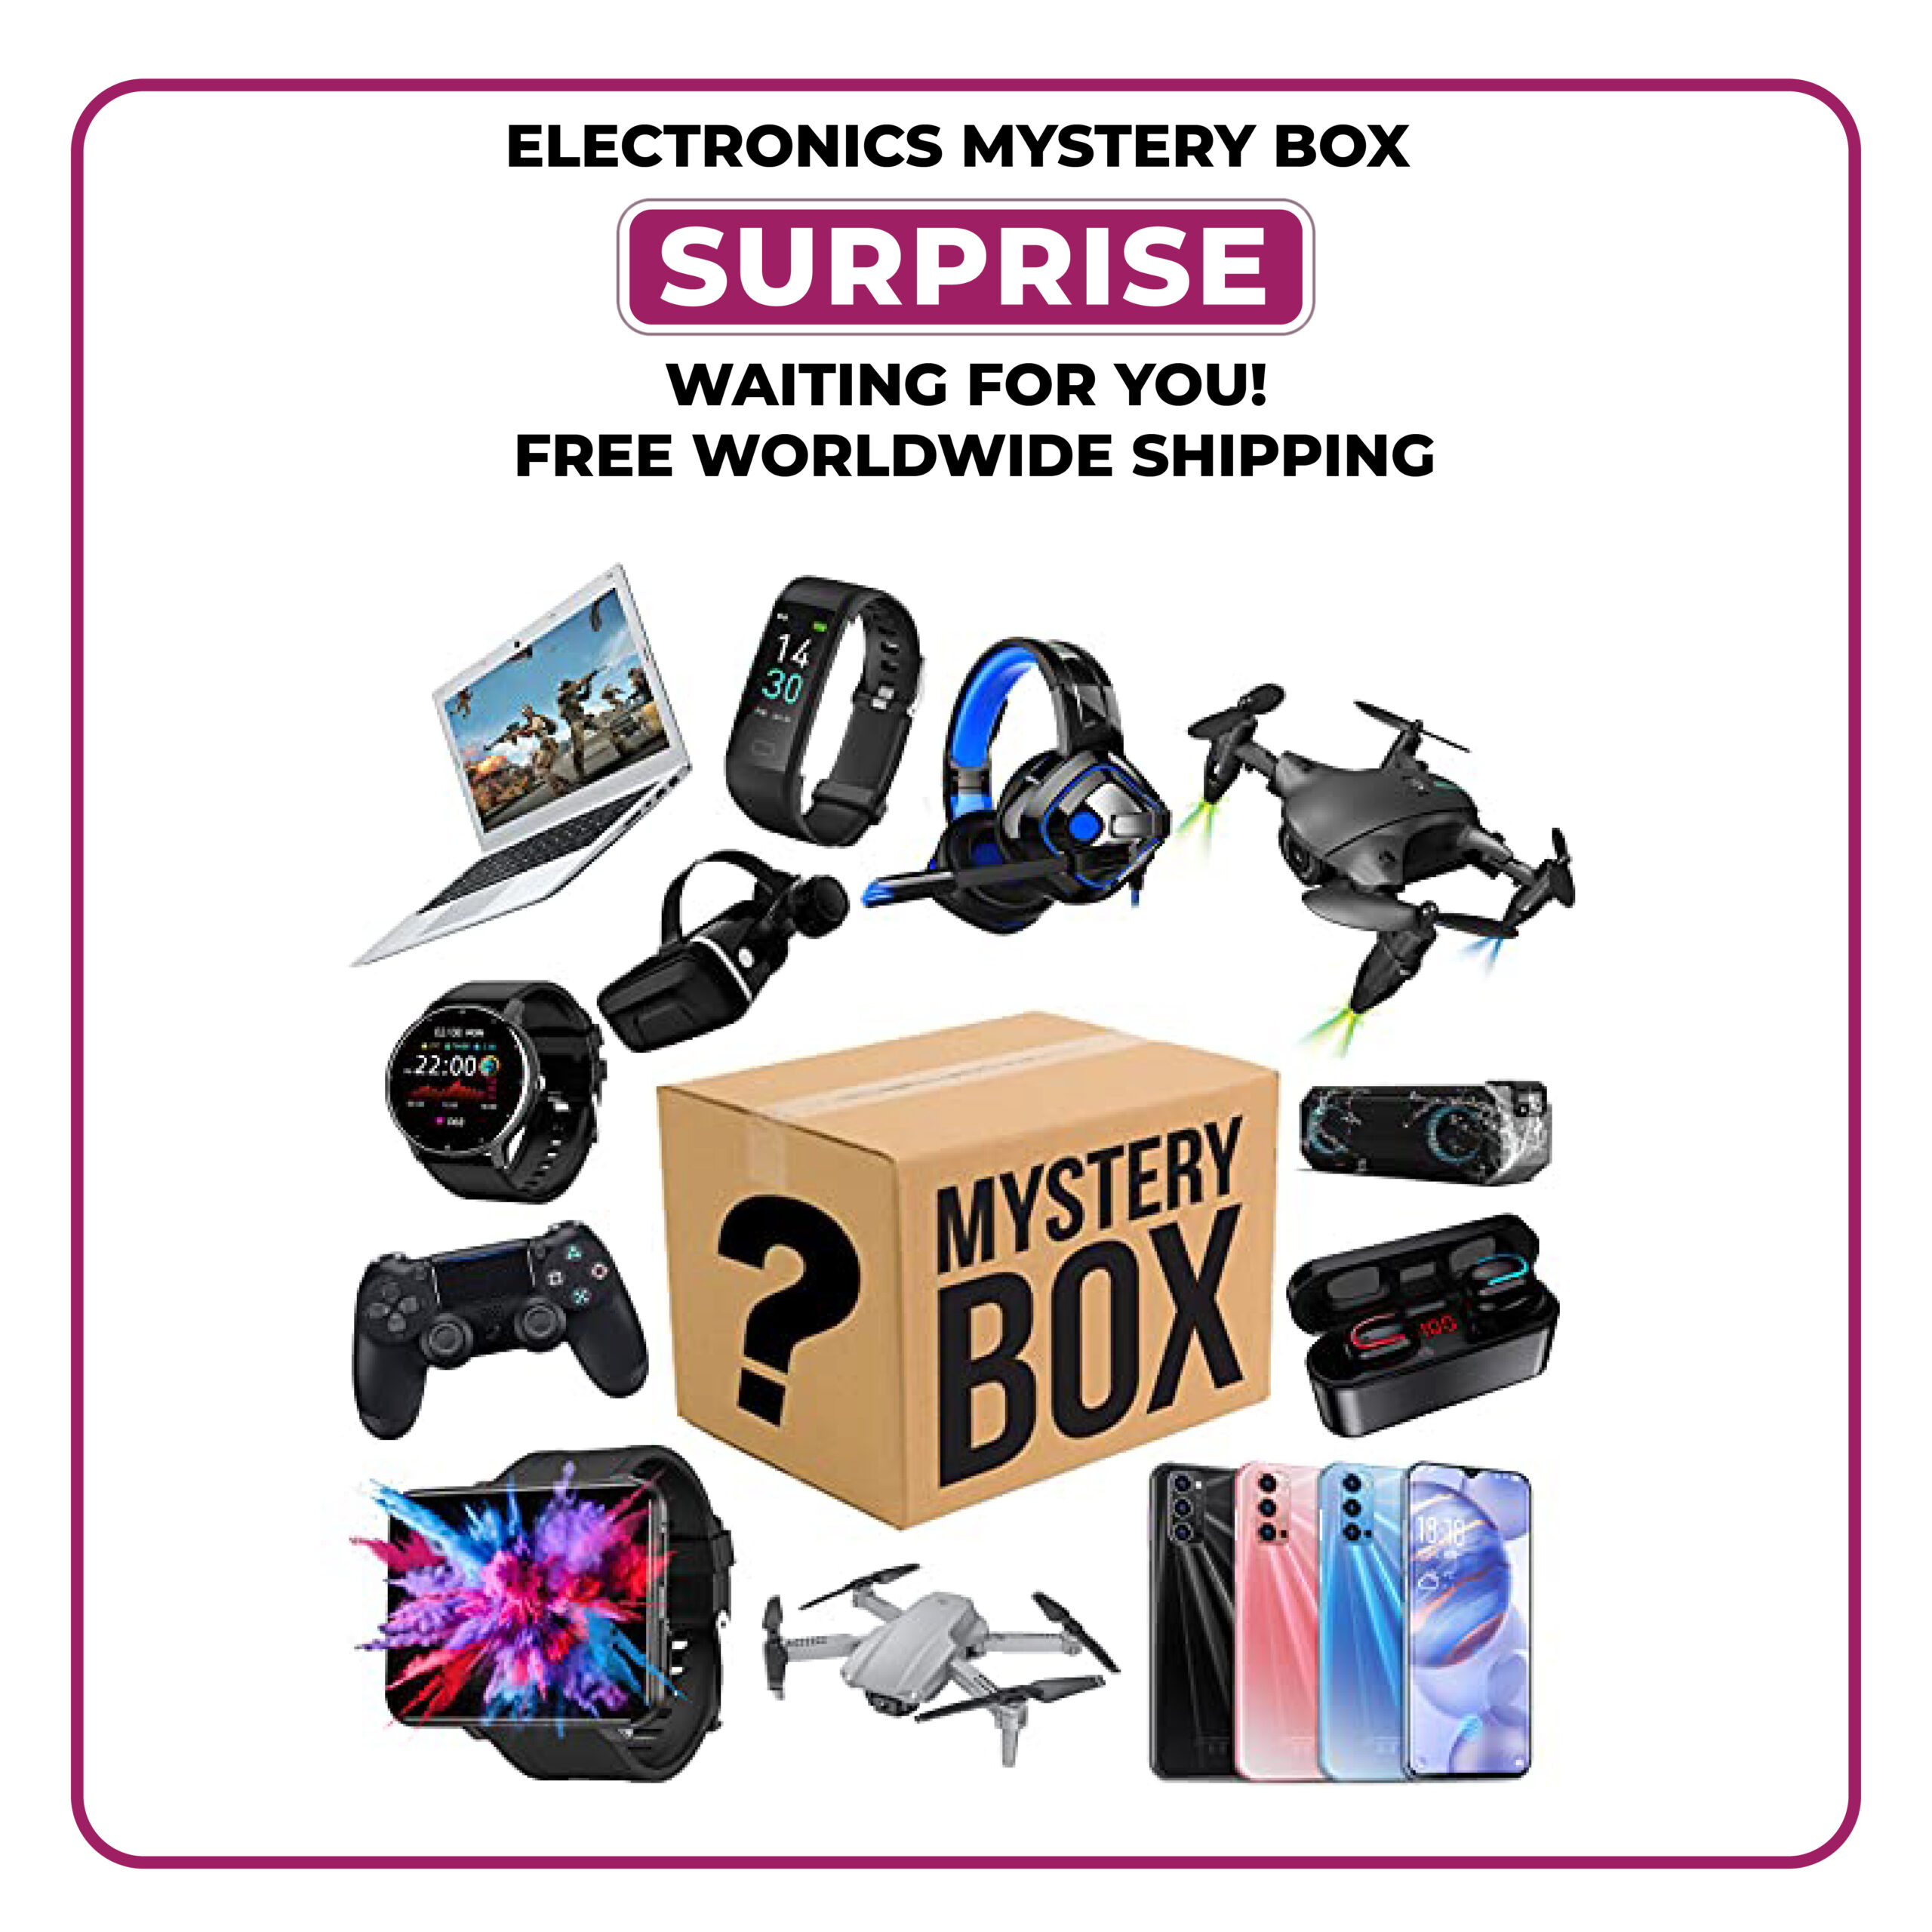 Mystery Box Electronics Lucky Box Box Electronics Random Style Heartbeat  Good Value for Money Surprise Yourself or Give It As a Gift To Others D  price in UAE,  UAE